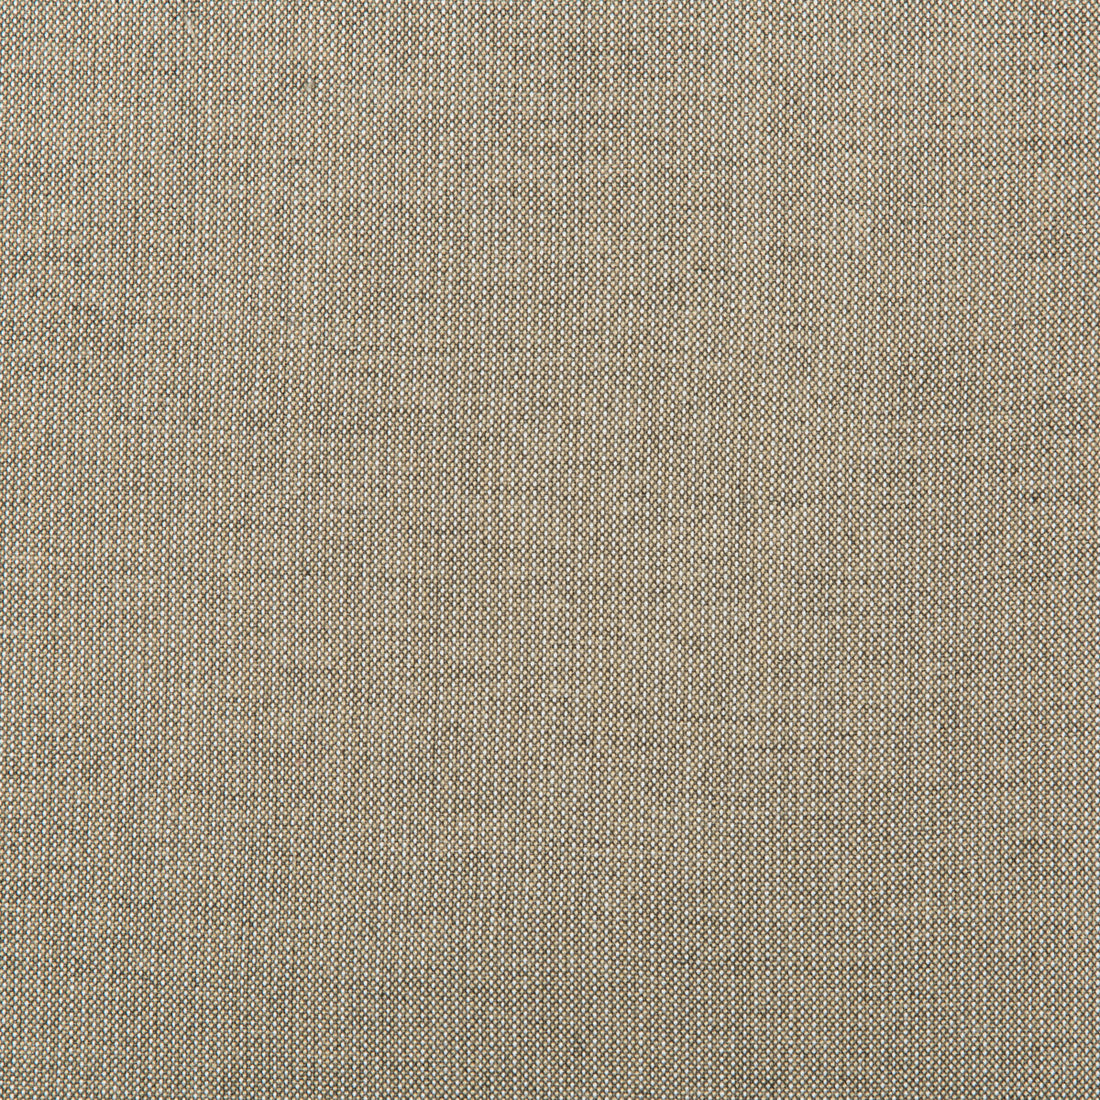 Kravet Basics fabric in 36820-106 color - pattern 36820.106.0 - by Kravet Basics in the Indoor / Outdoor collection